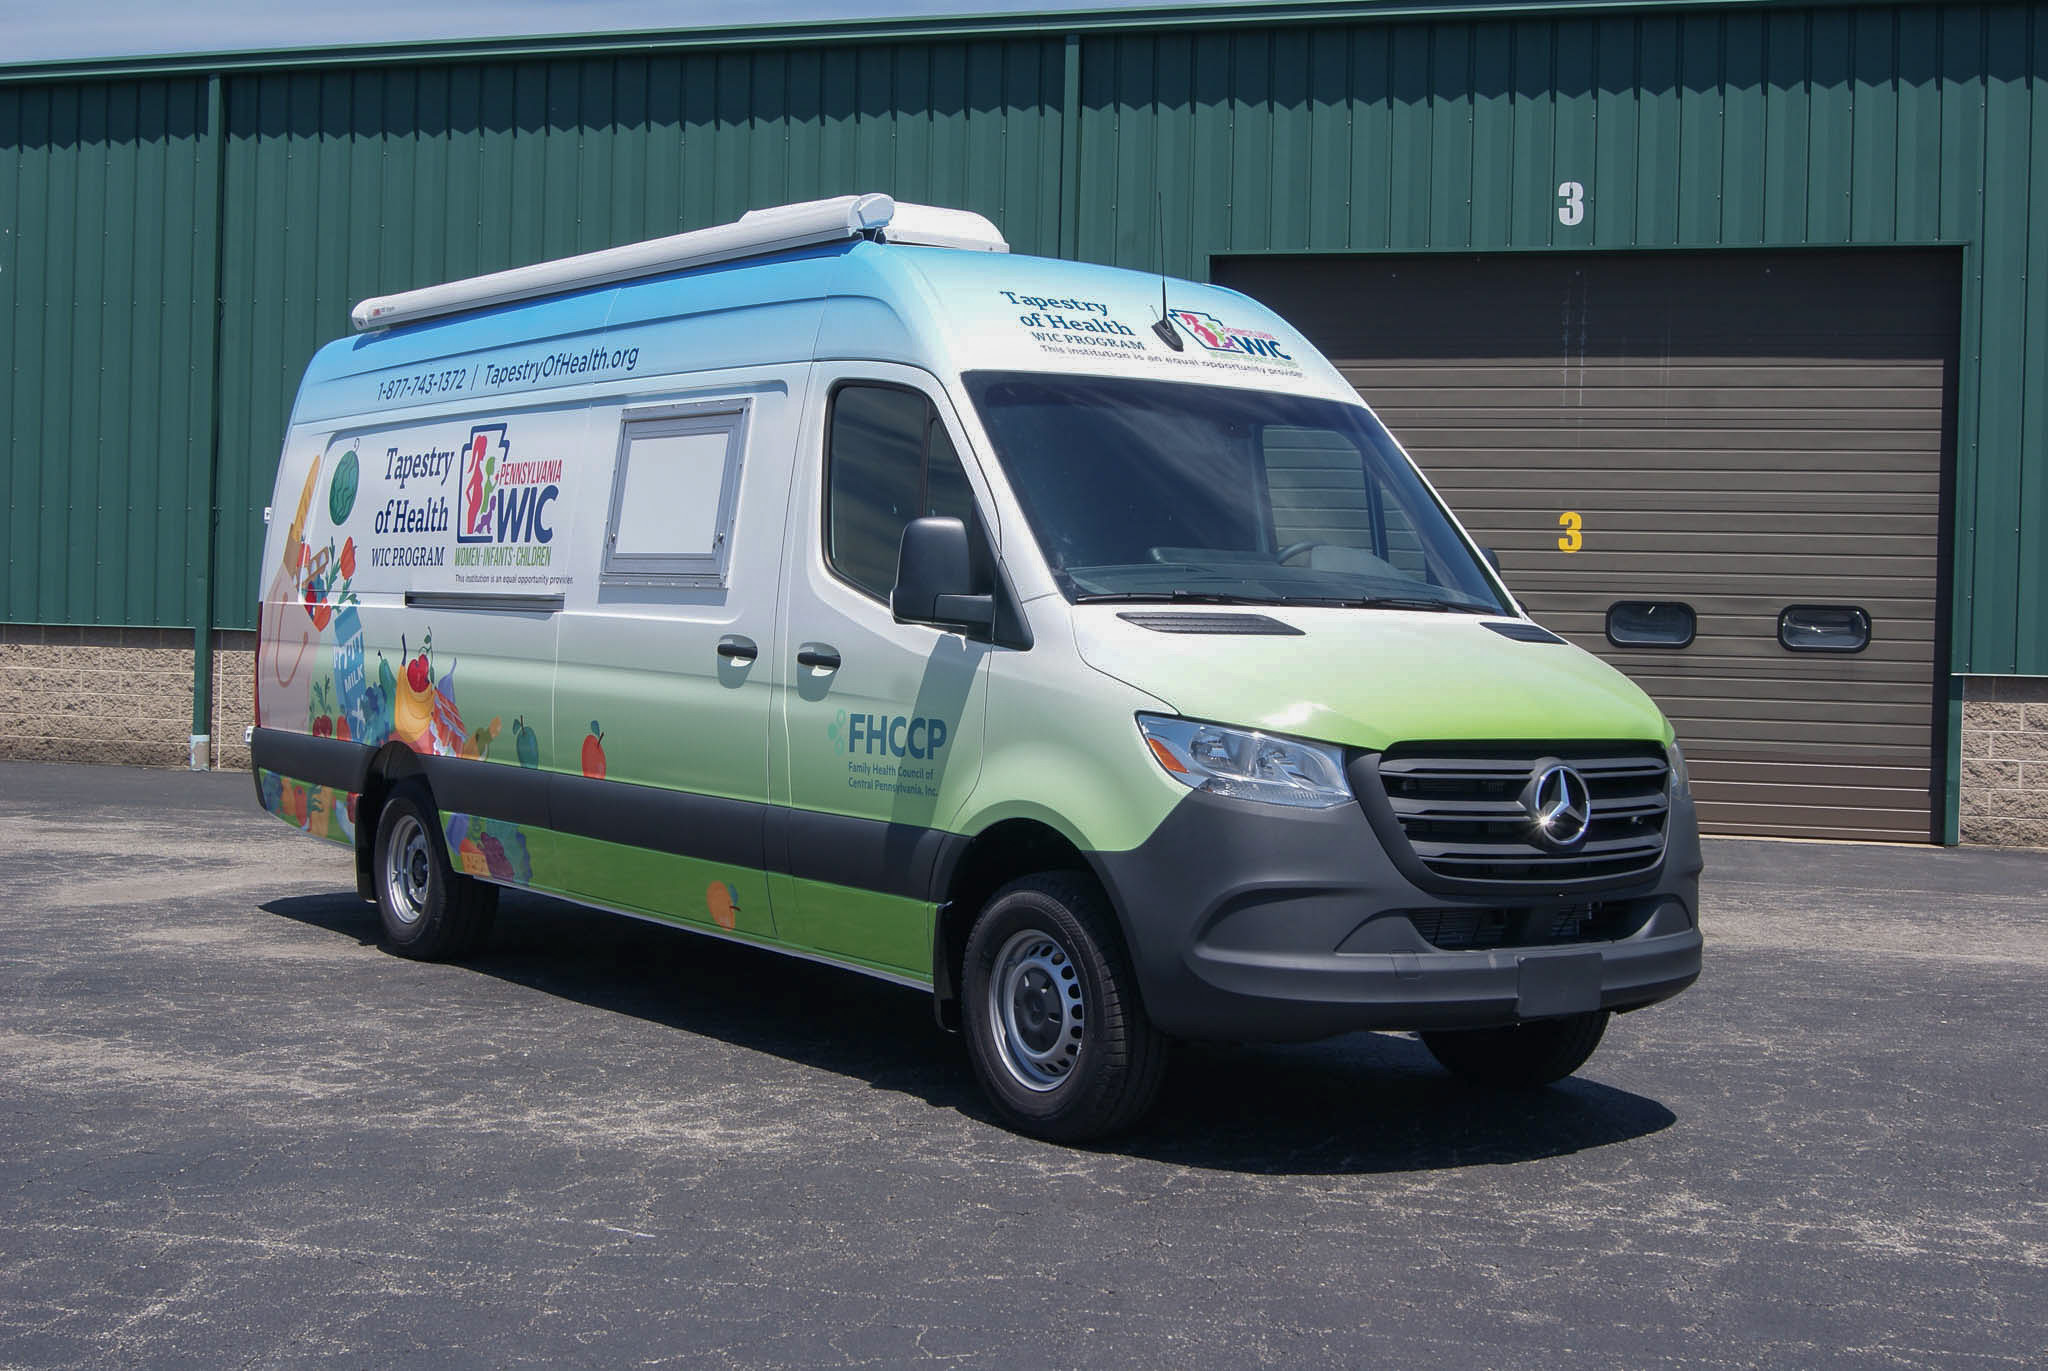 Angled view of the Mobile Outreach sprinter as viewed from the front.